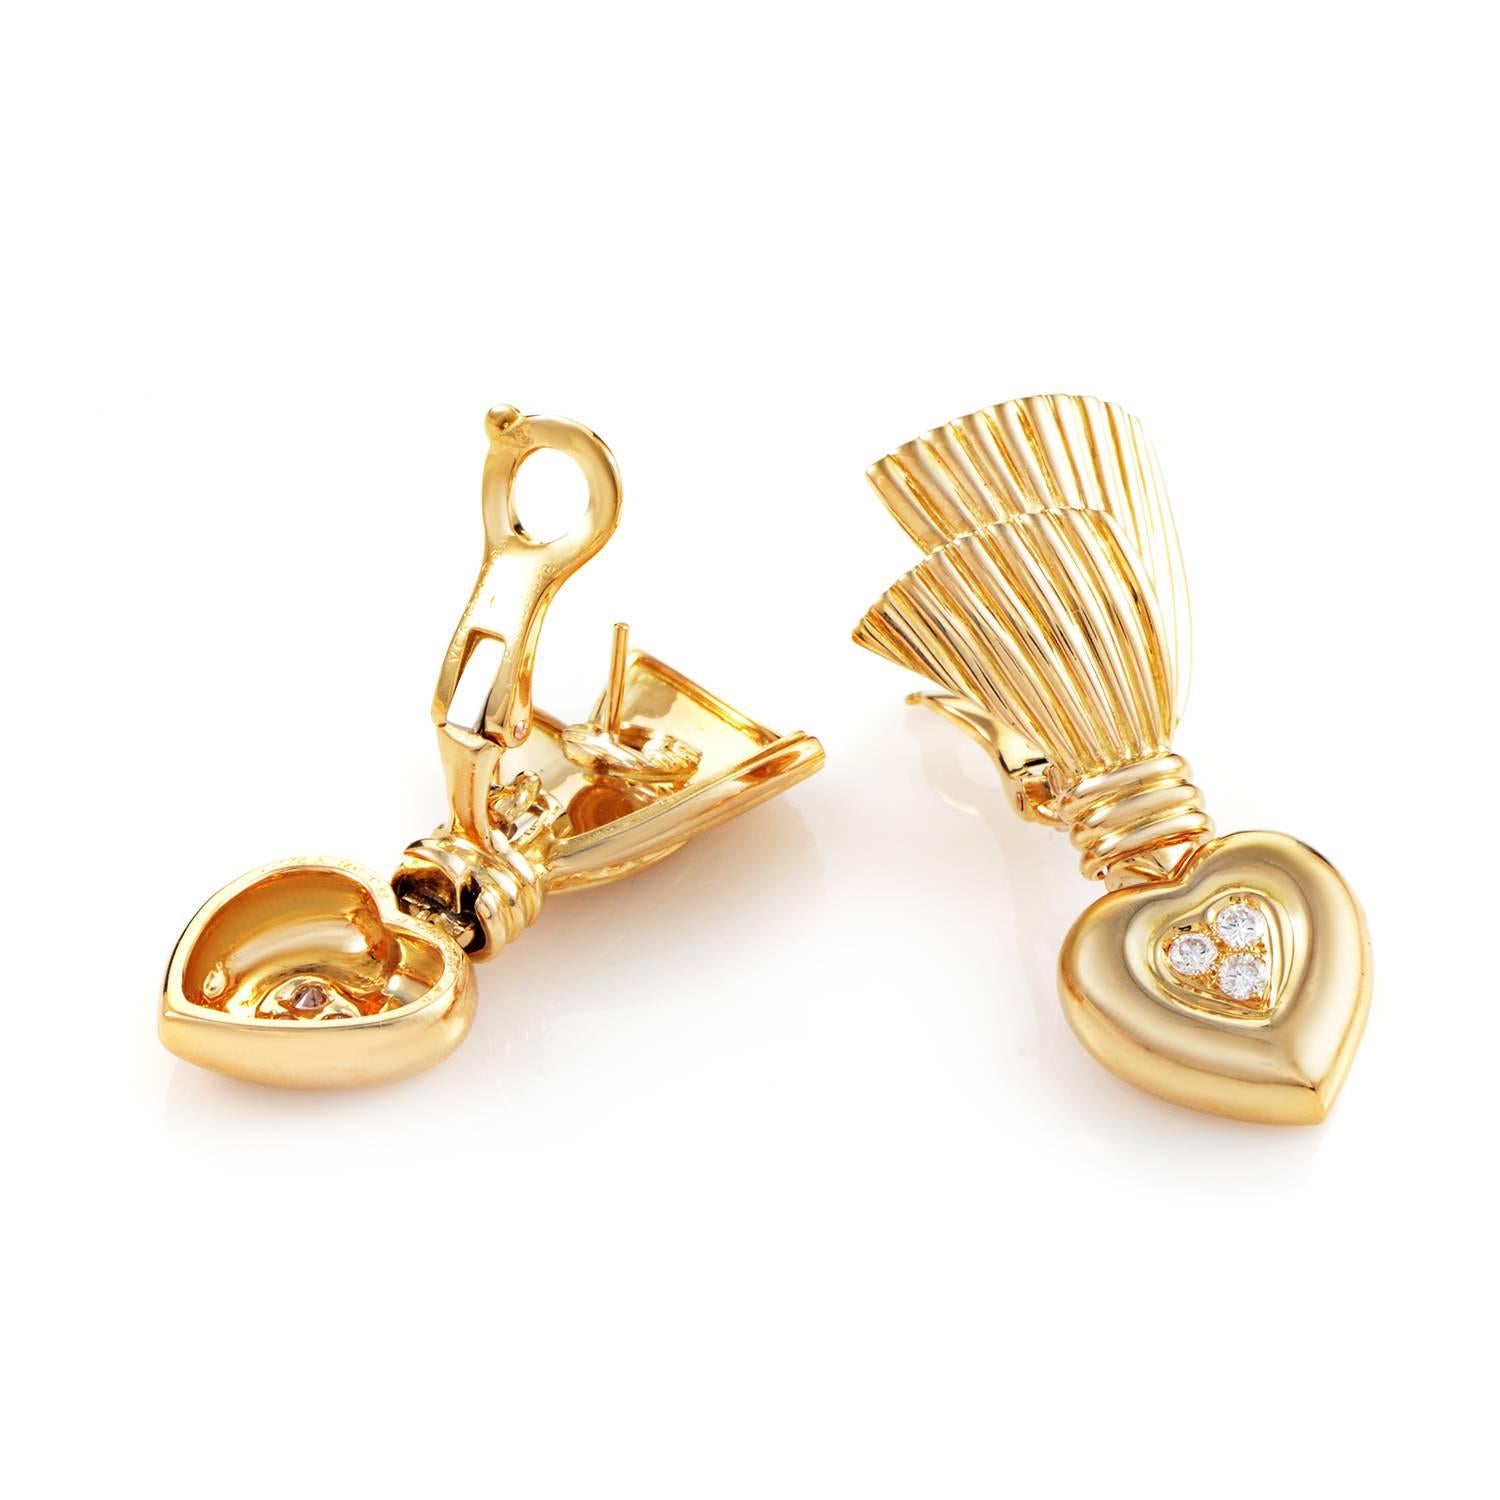 The romantic shape of a heart is graced with enchanting radiance of 18K yellow gold in this gorgeous pair of earrings from Van Cleef & Arpels, while 0.40ct of glittering diamonds produce a luxurious allure.
Included Items: Manufacturer's Papers